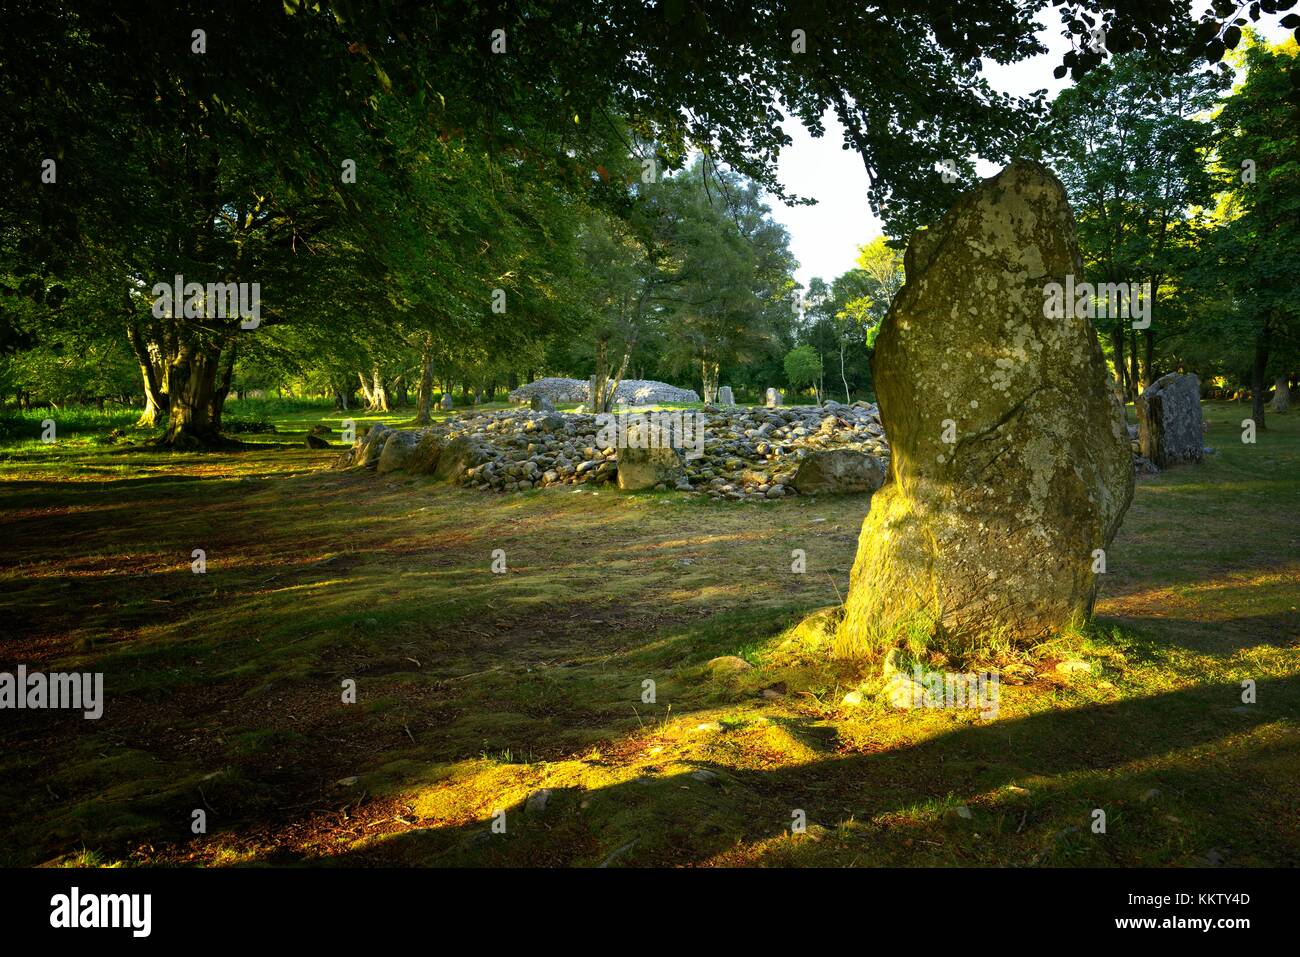 N.E. over the central and northern cairns of the 3 Clava Cairns, Inverness, Scotland. Prehistoric Bronze Age burial tombs Stock Photo